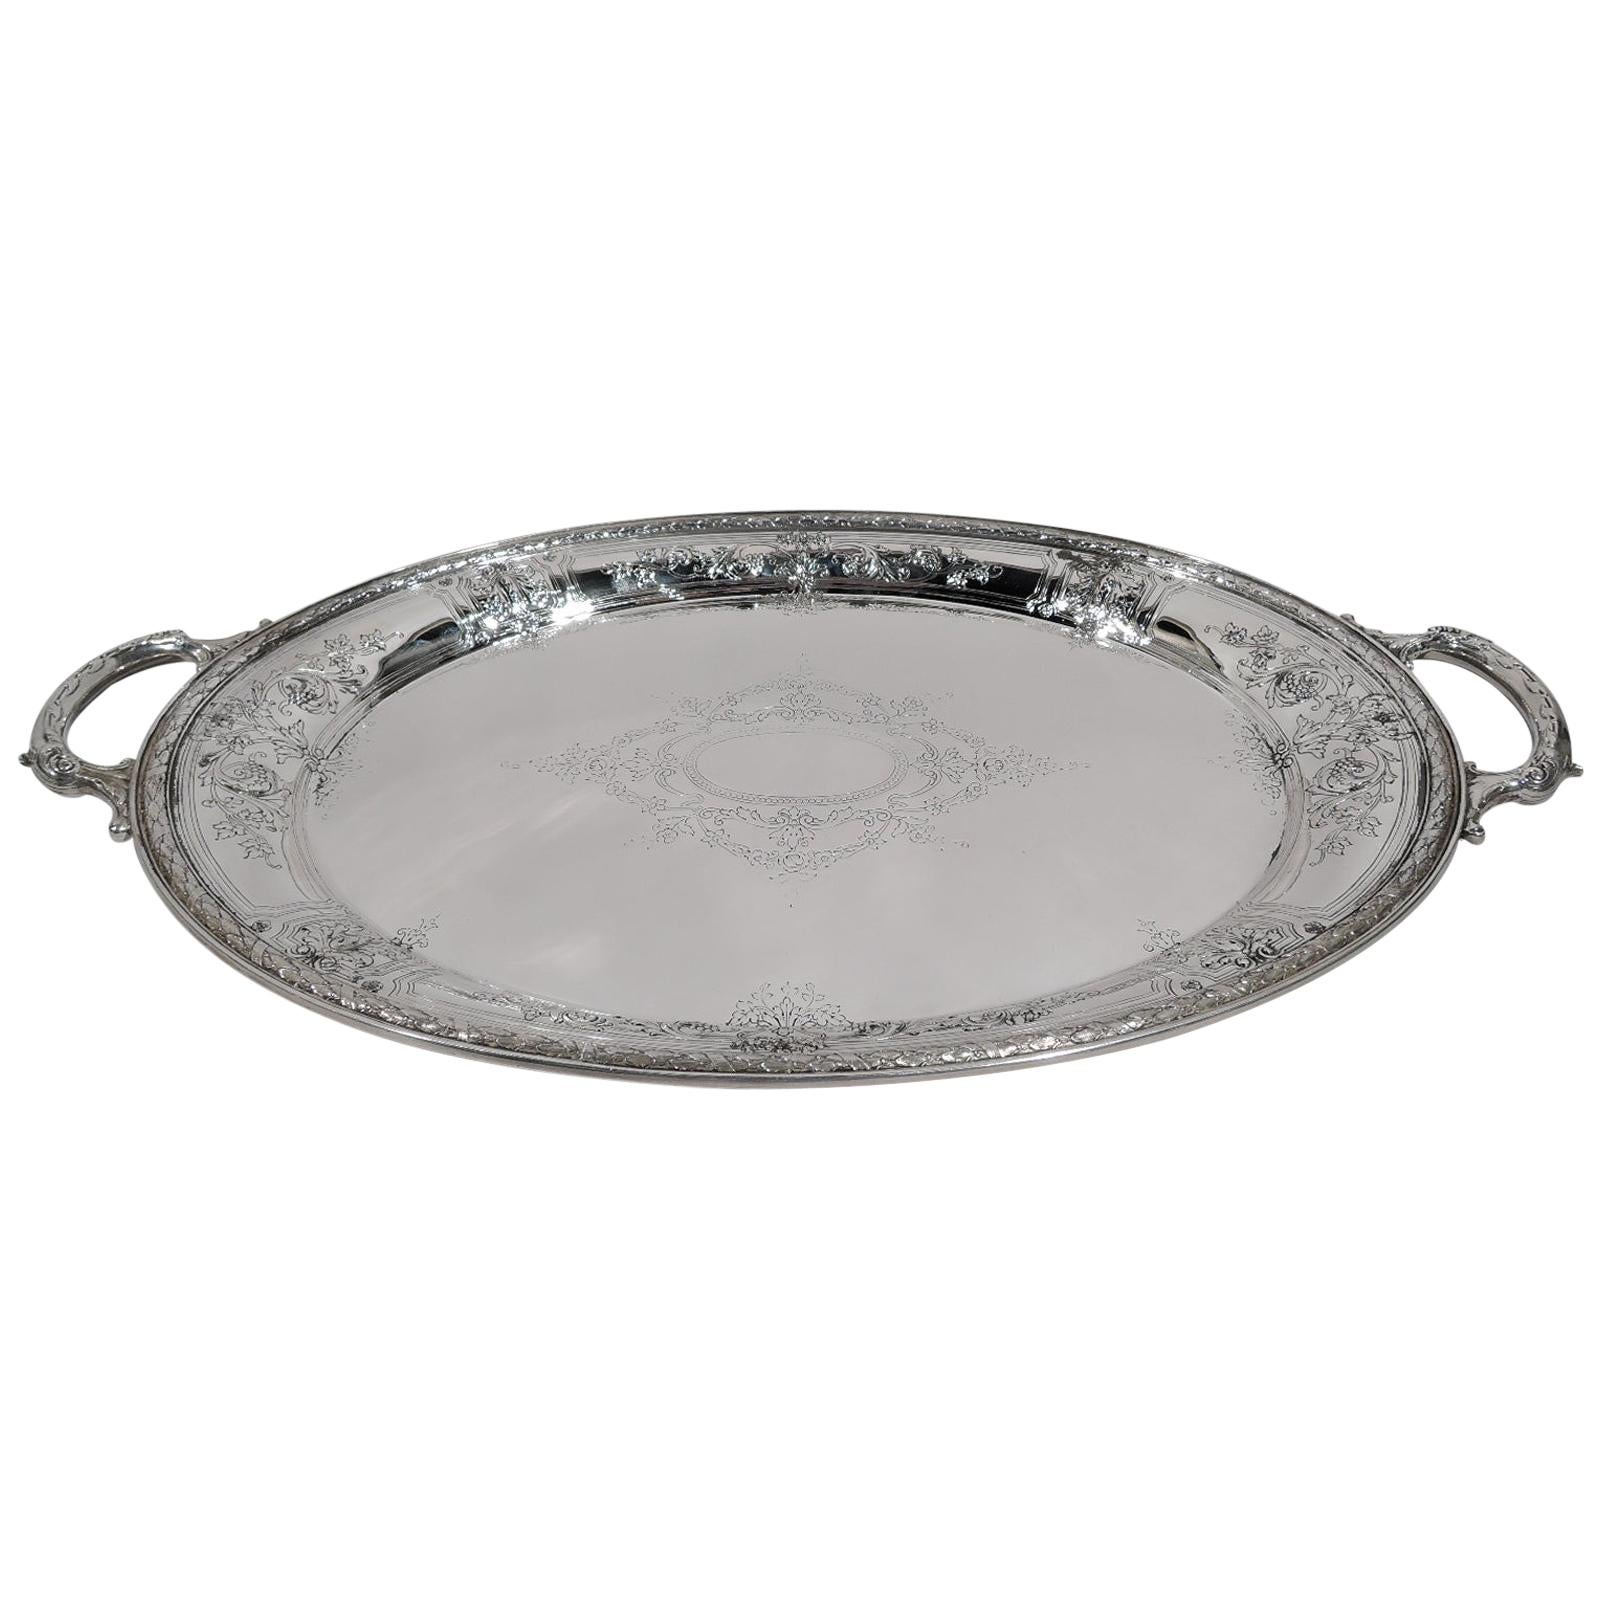 Antique Gorham Maintenon Sterling Silver Serving Tray